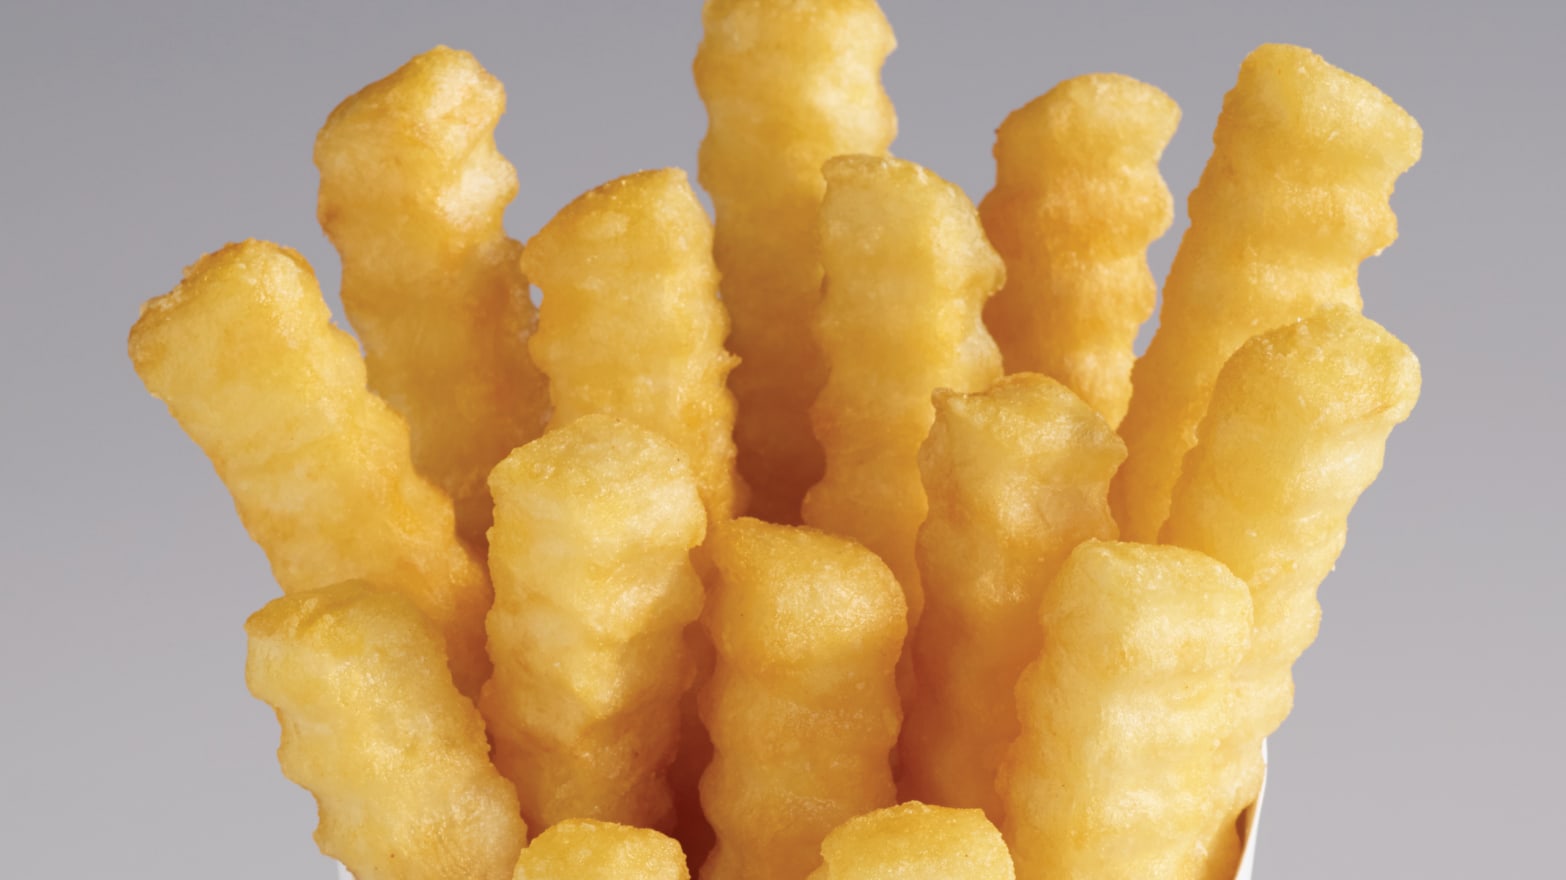 The Best Fast-Food Fries: How Burger King's Satisfries Compare